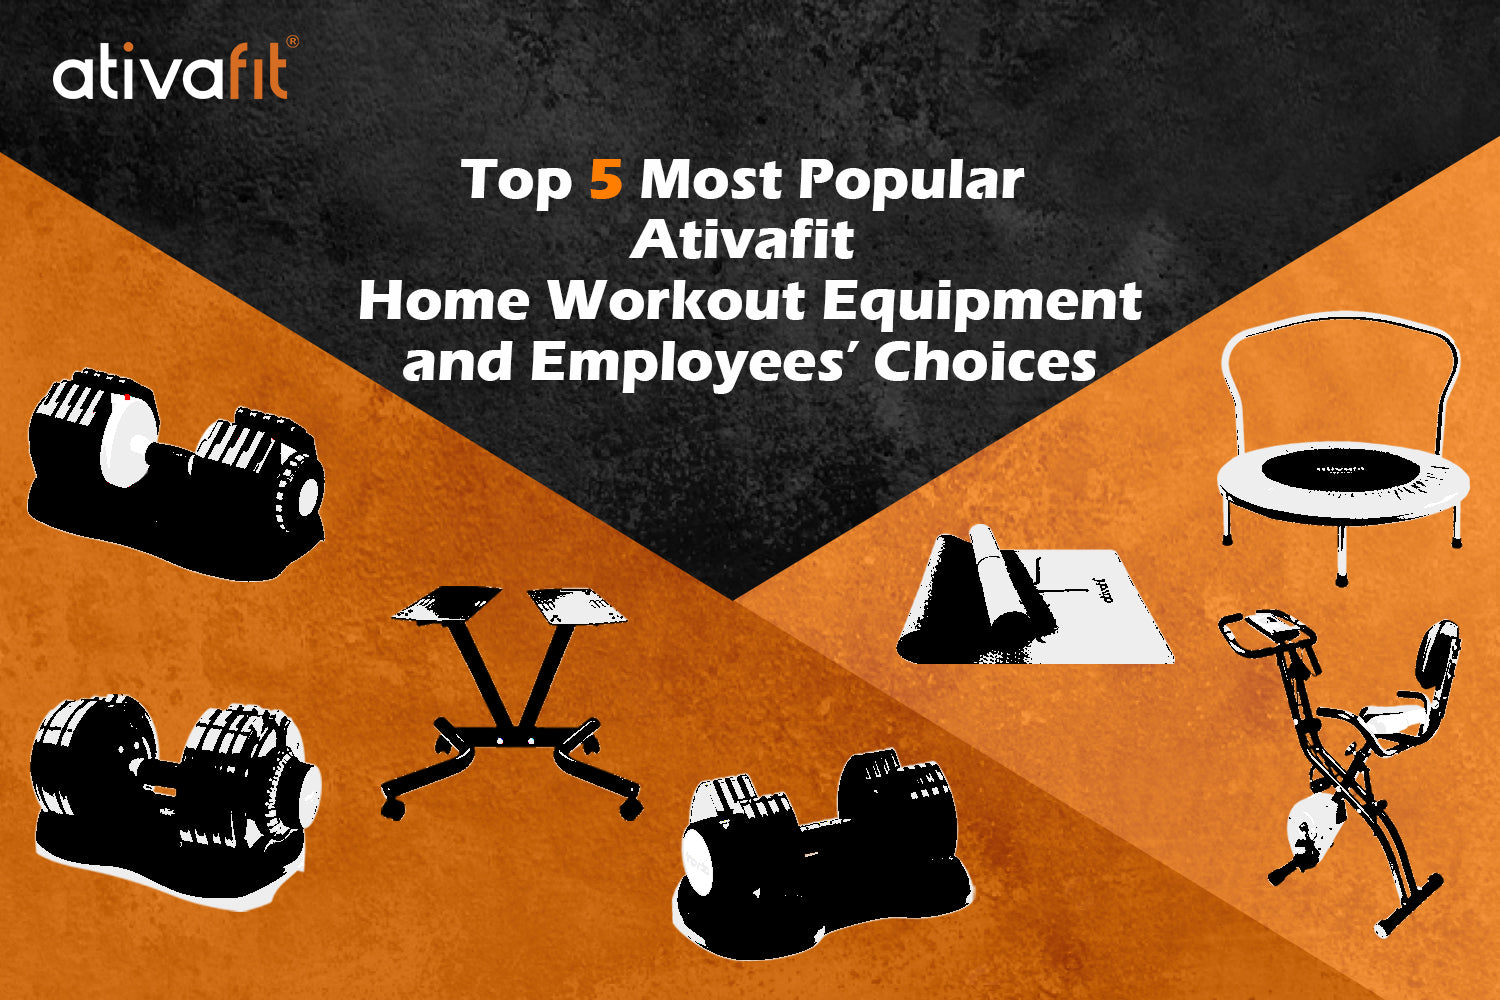 Top 5 Most Popular Ativafit Home Workout Equipment and Employees’ Choices